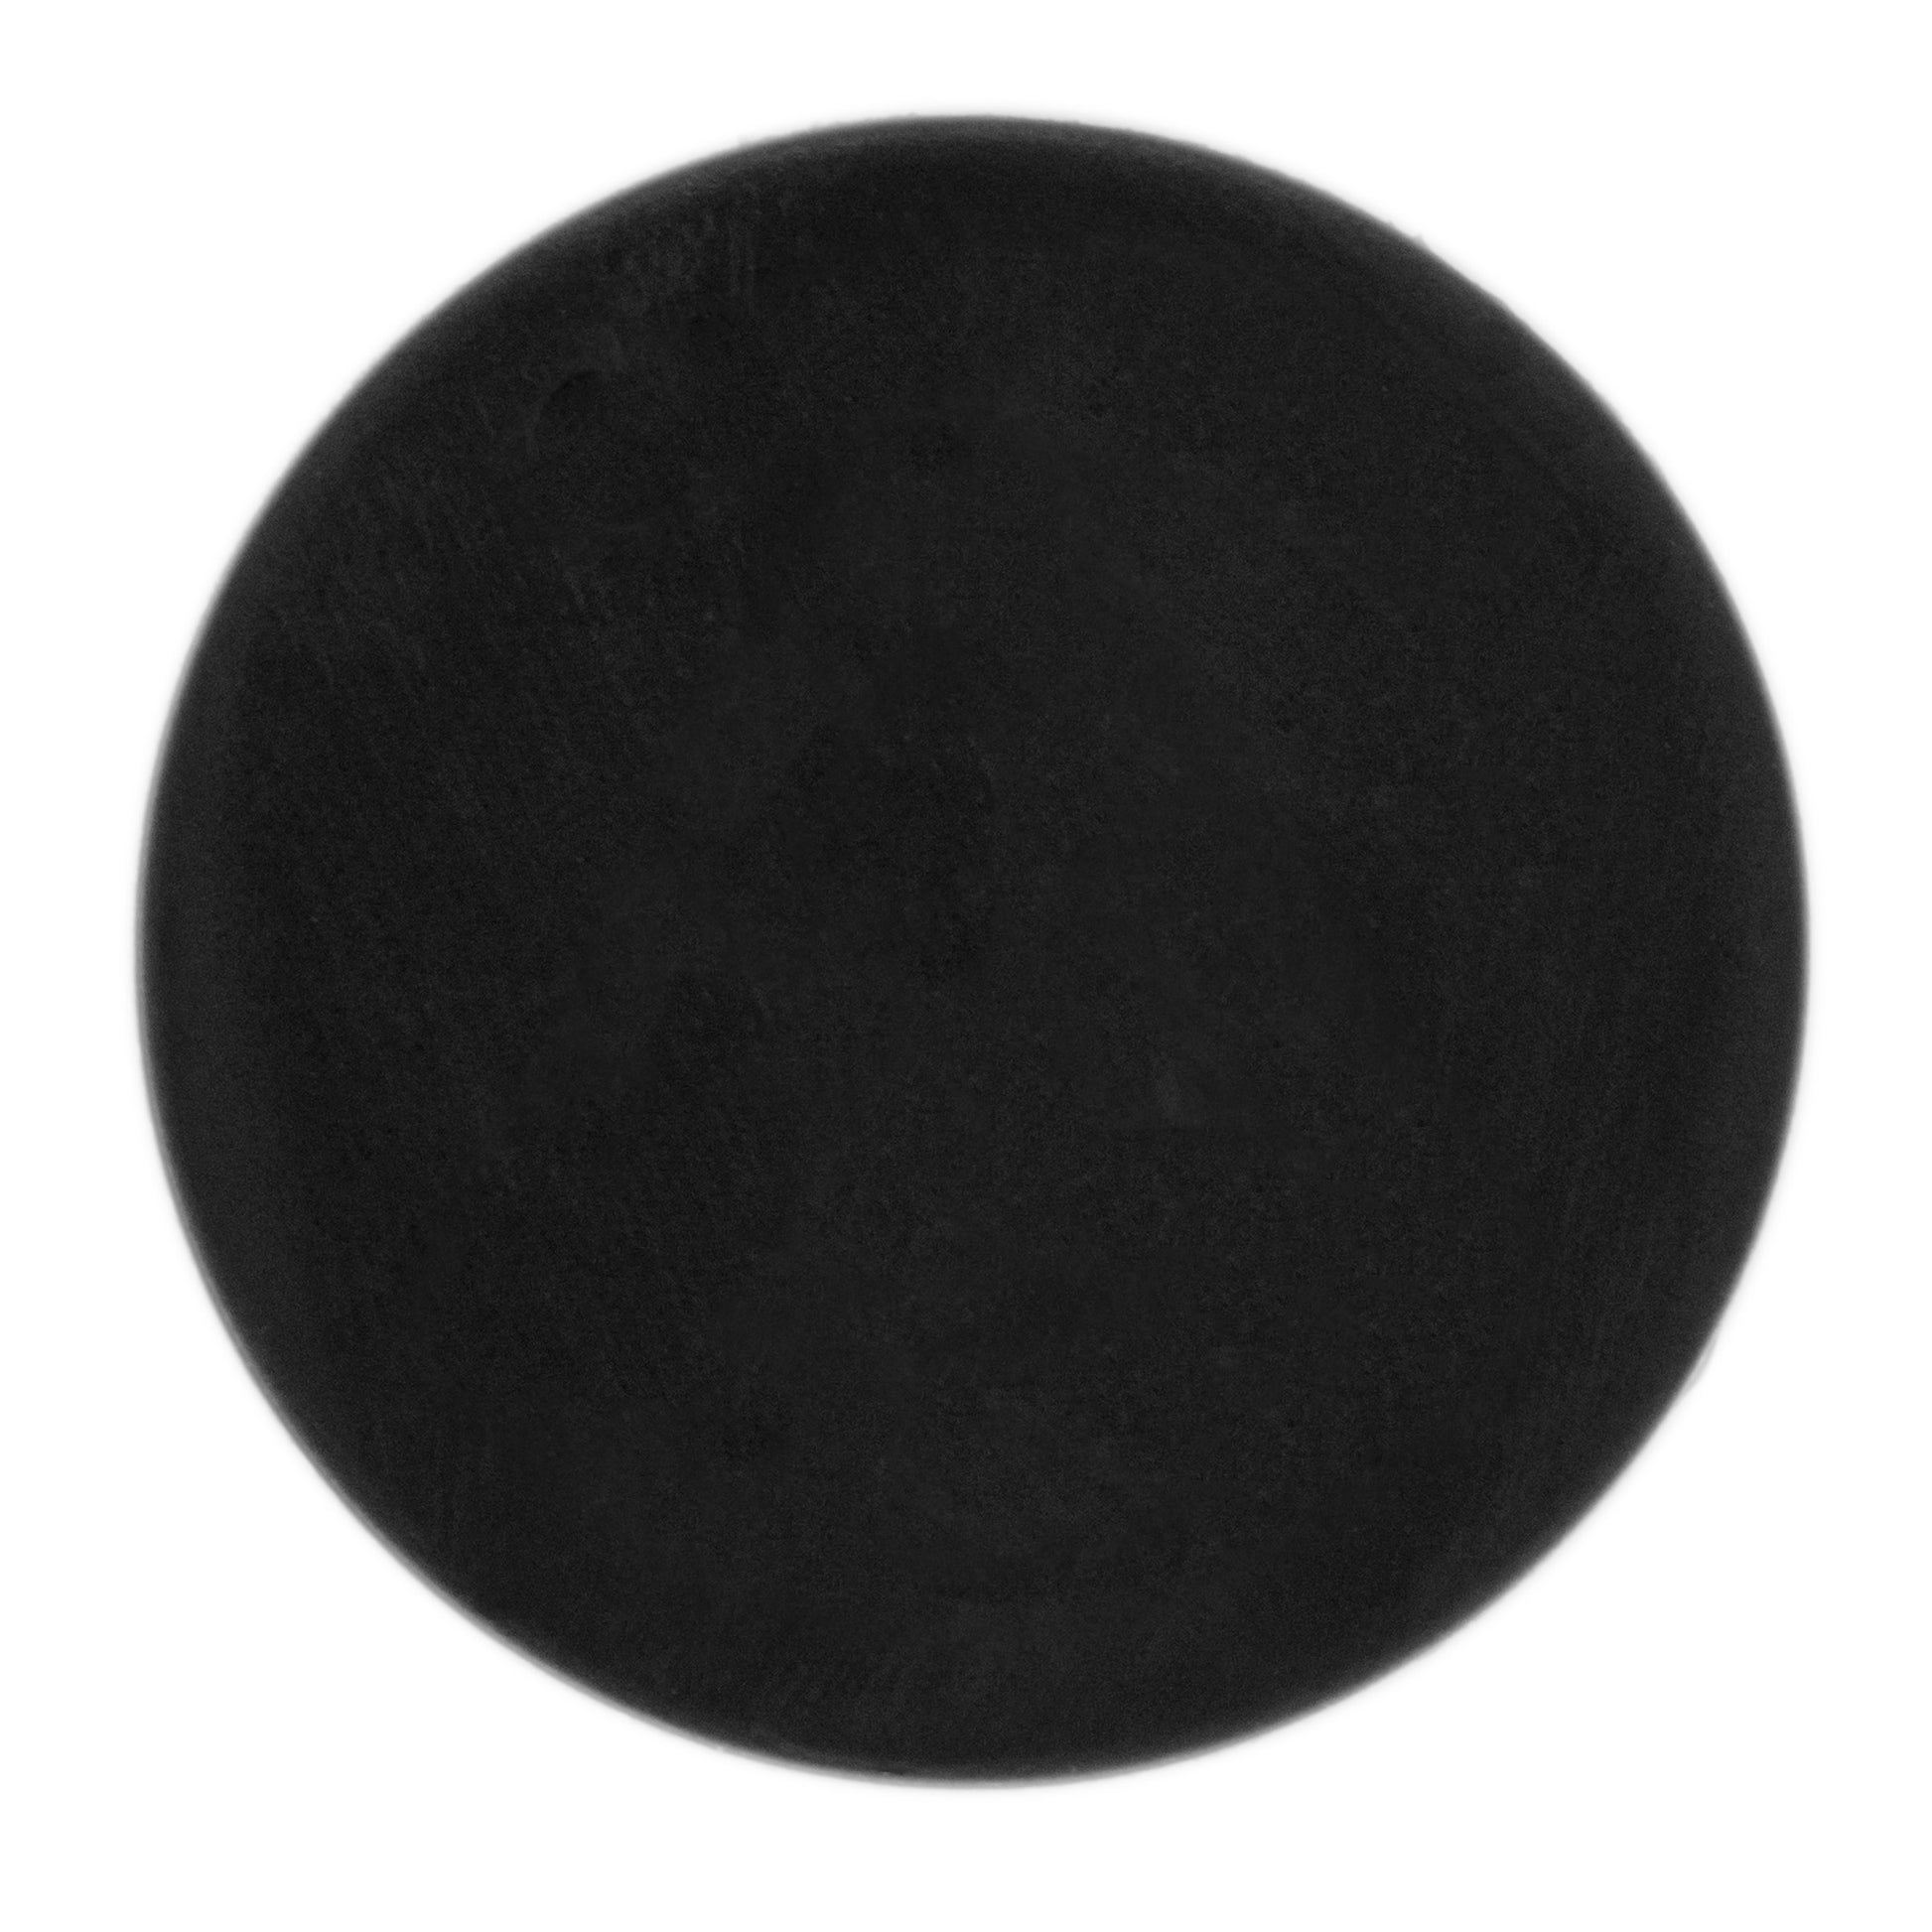 Load image into Gallery viewer, SND100BK Neodymium Silicone-Covered Disc Magnet - Top View